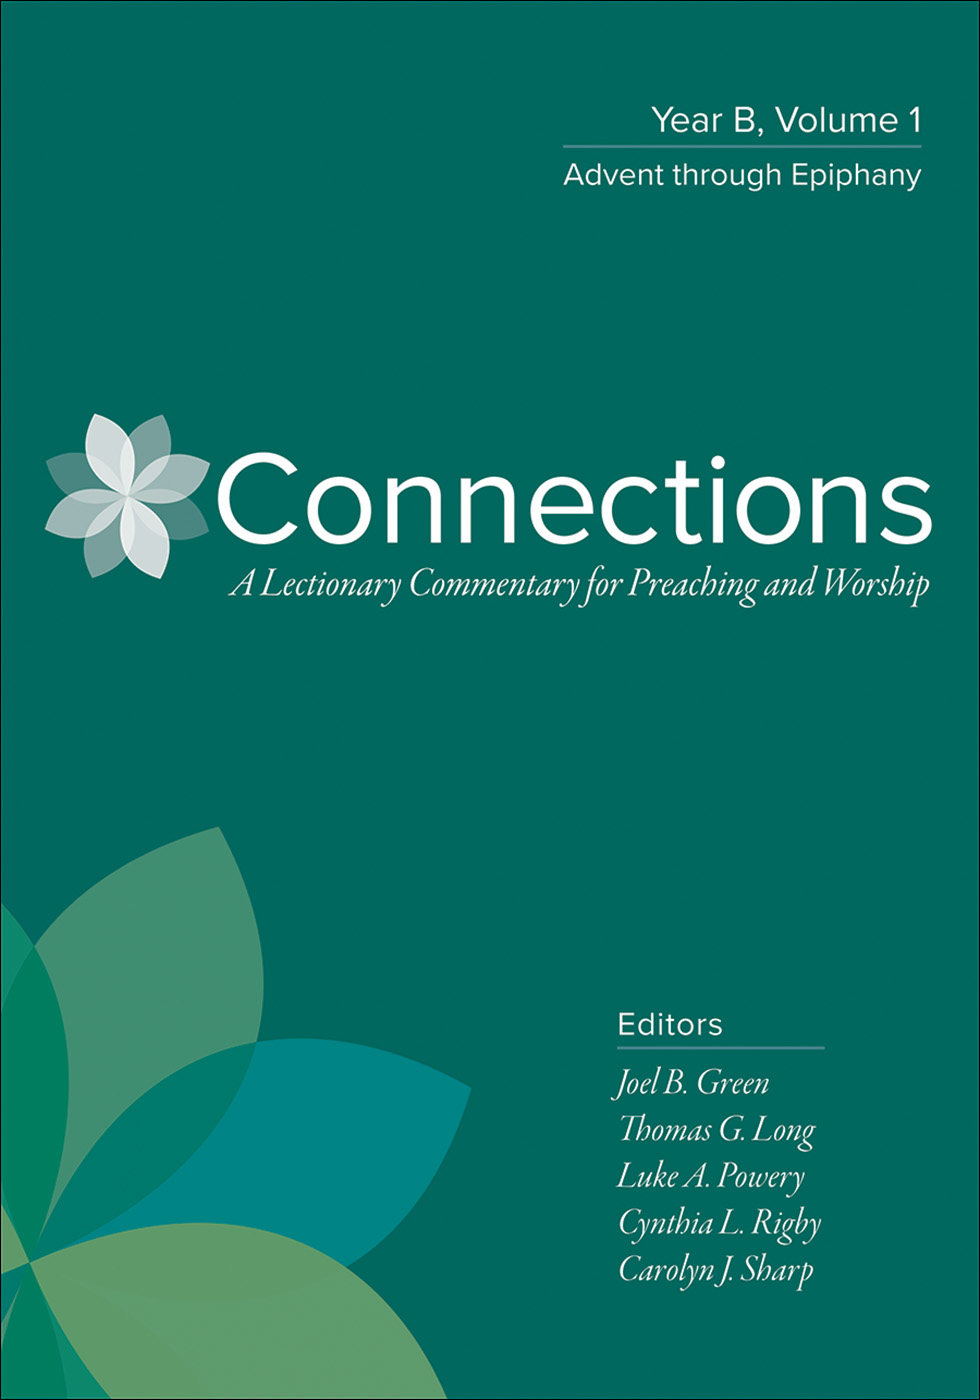 Connections: Year B, Volume 1